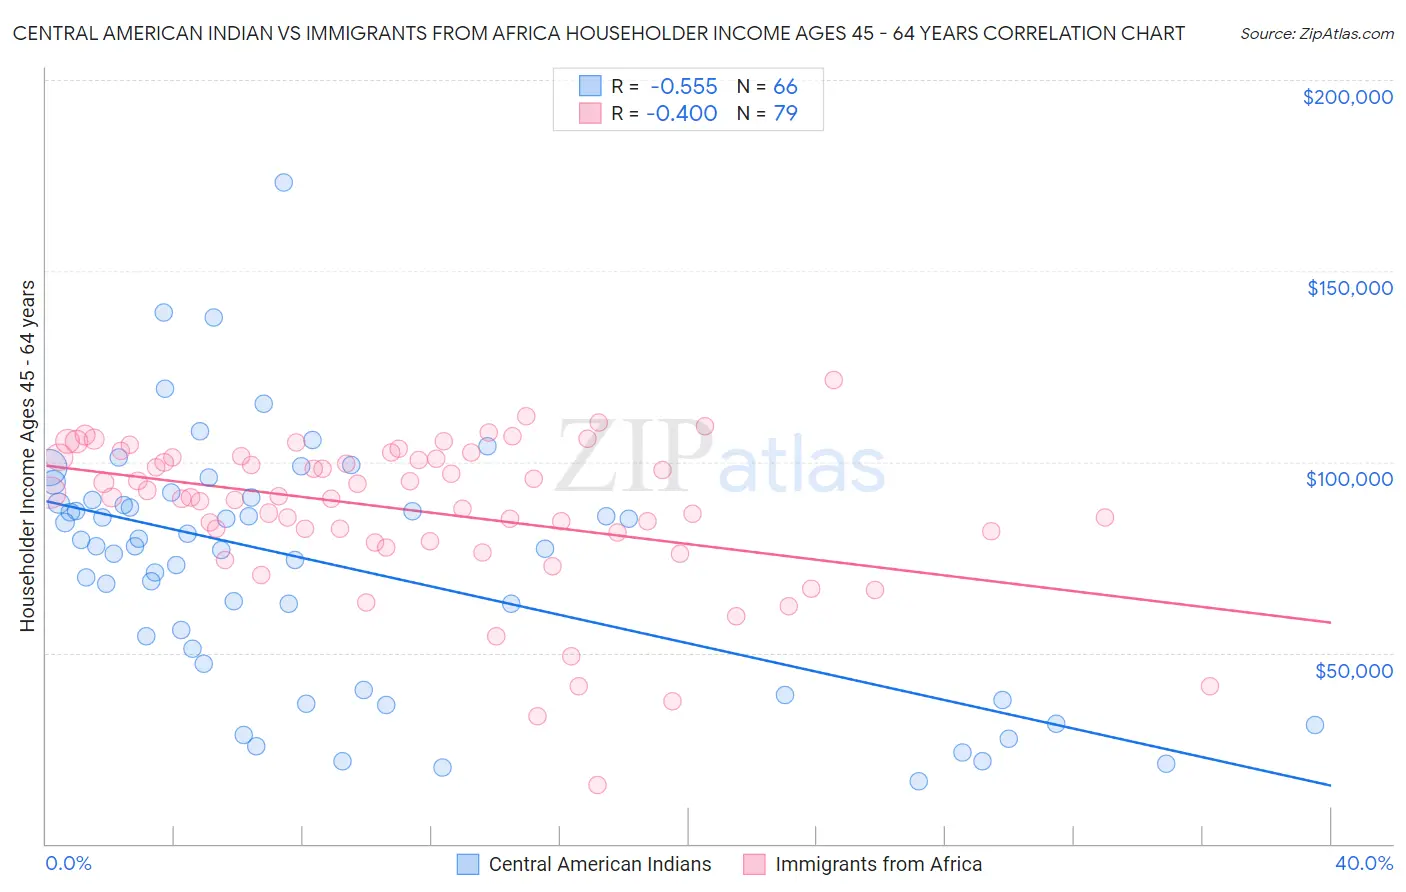 Central American Indian vs Immigrants from Africa Householder Income Ages 45 - 64 years